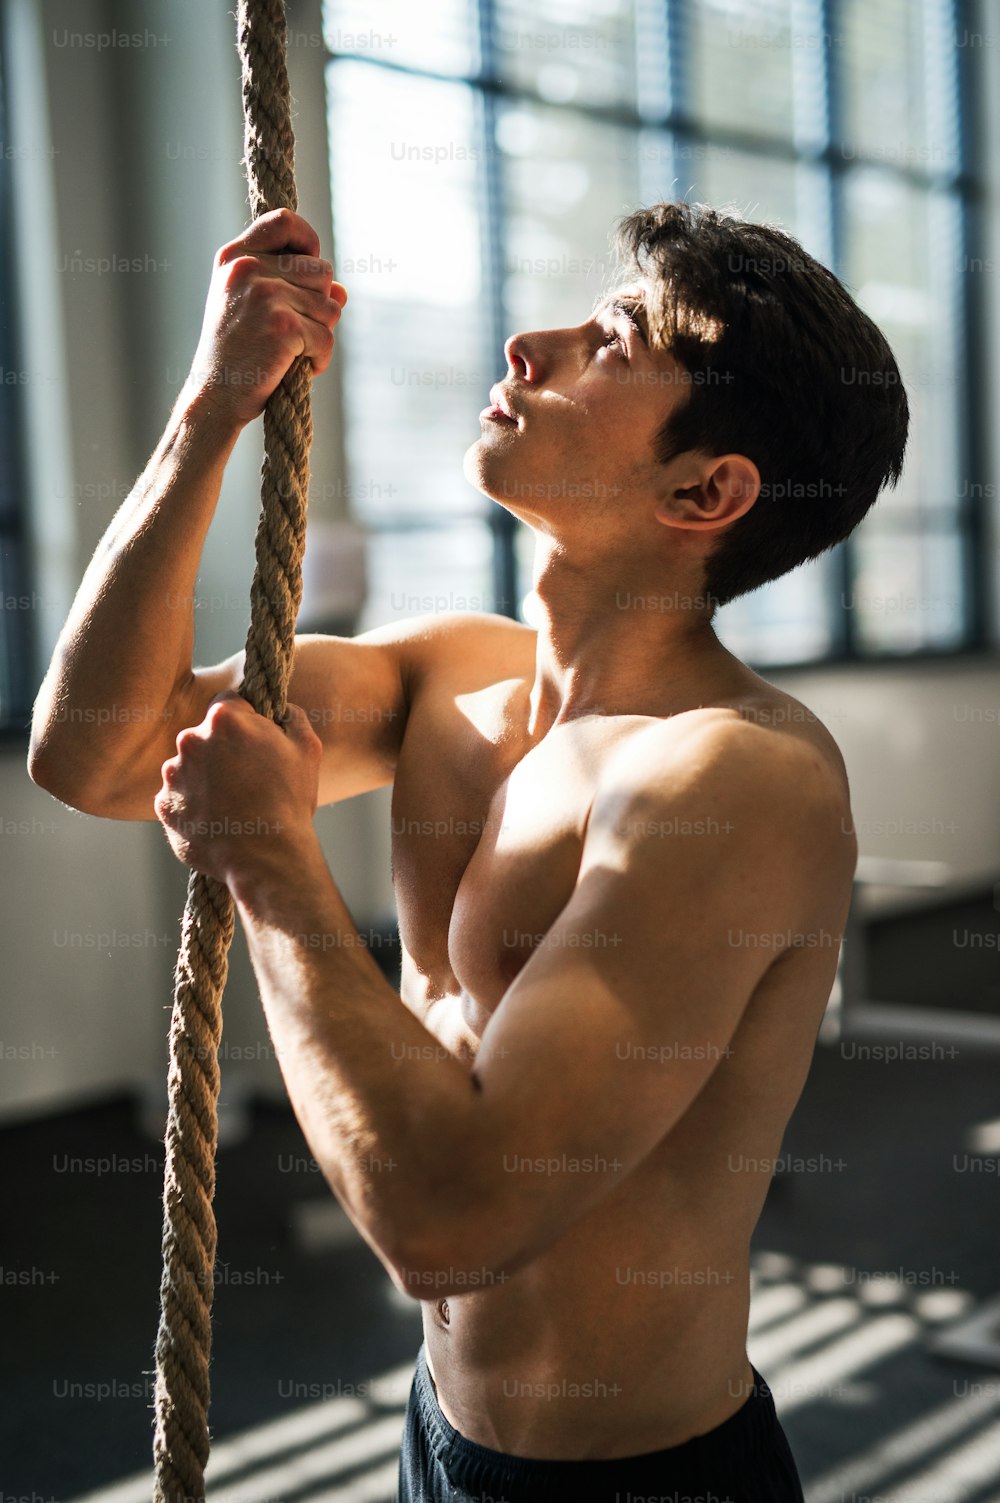 A fit young man in gym standing topless, holding a climbing rope.